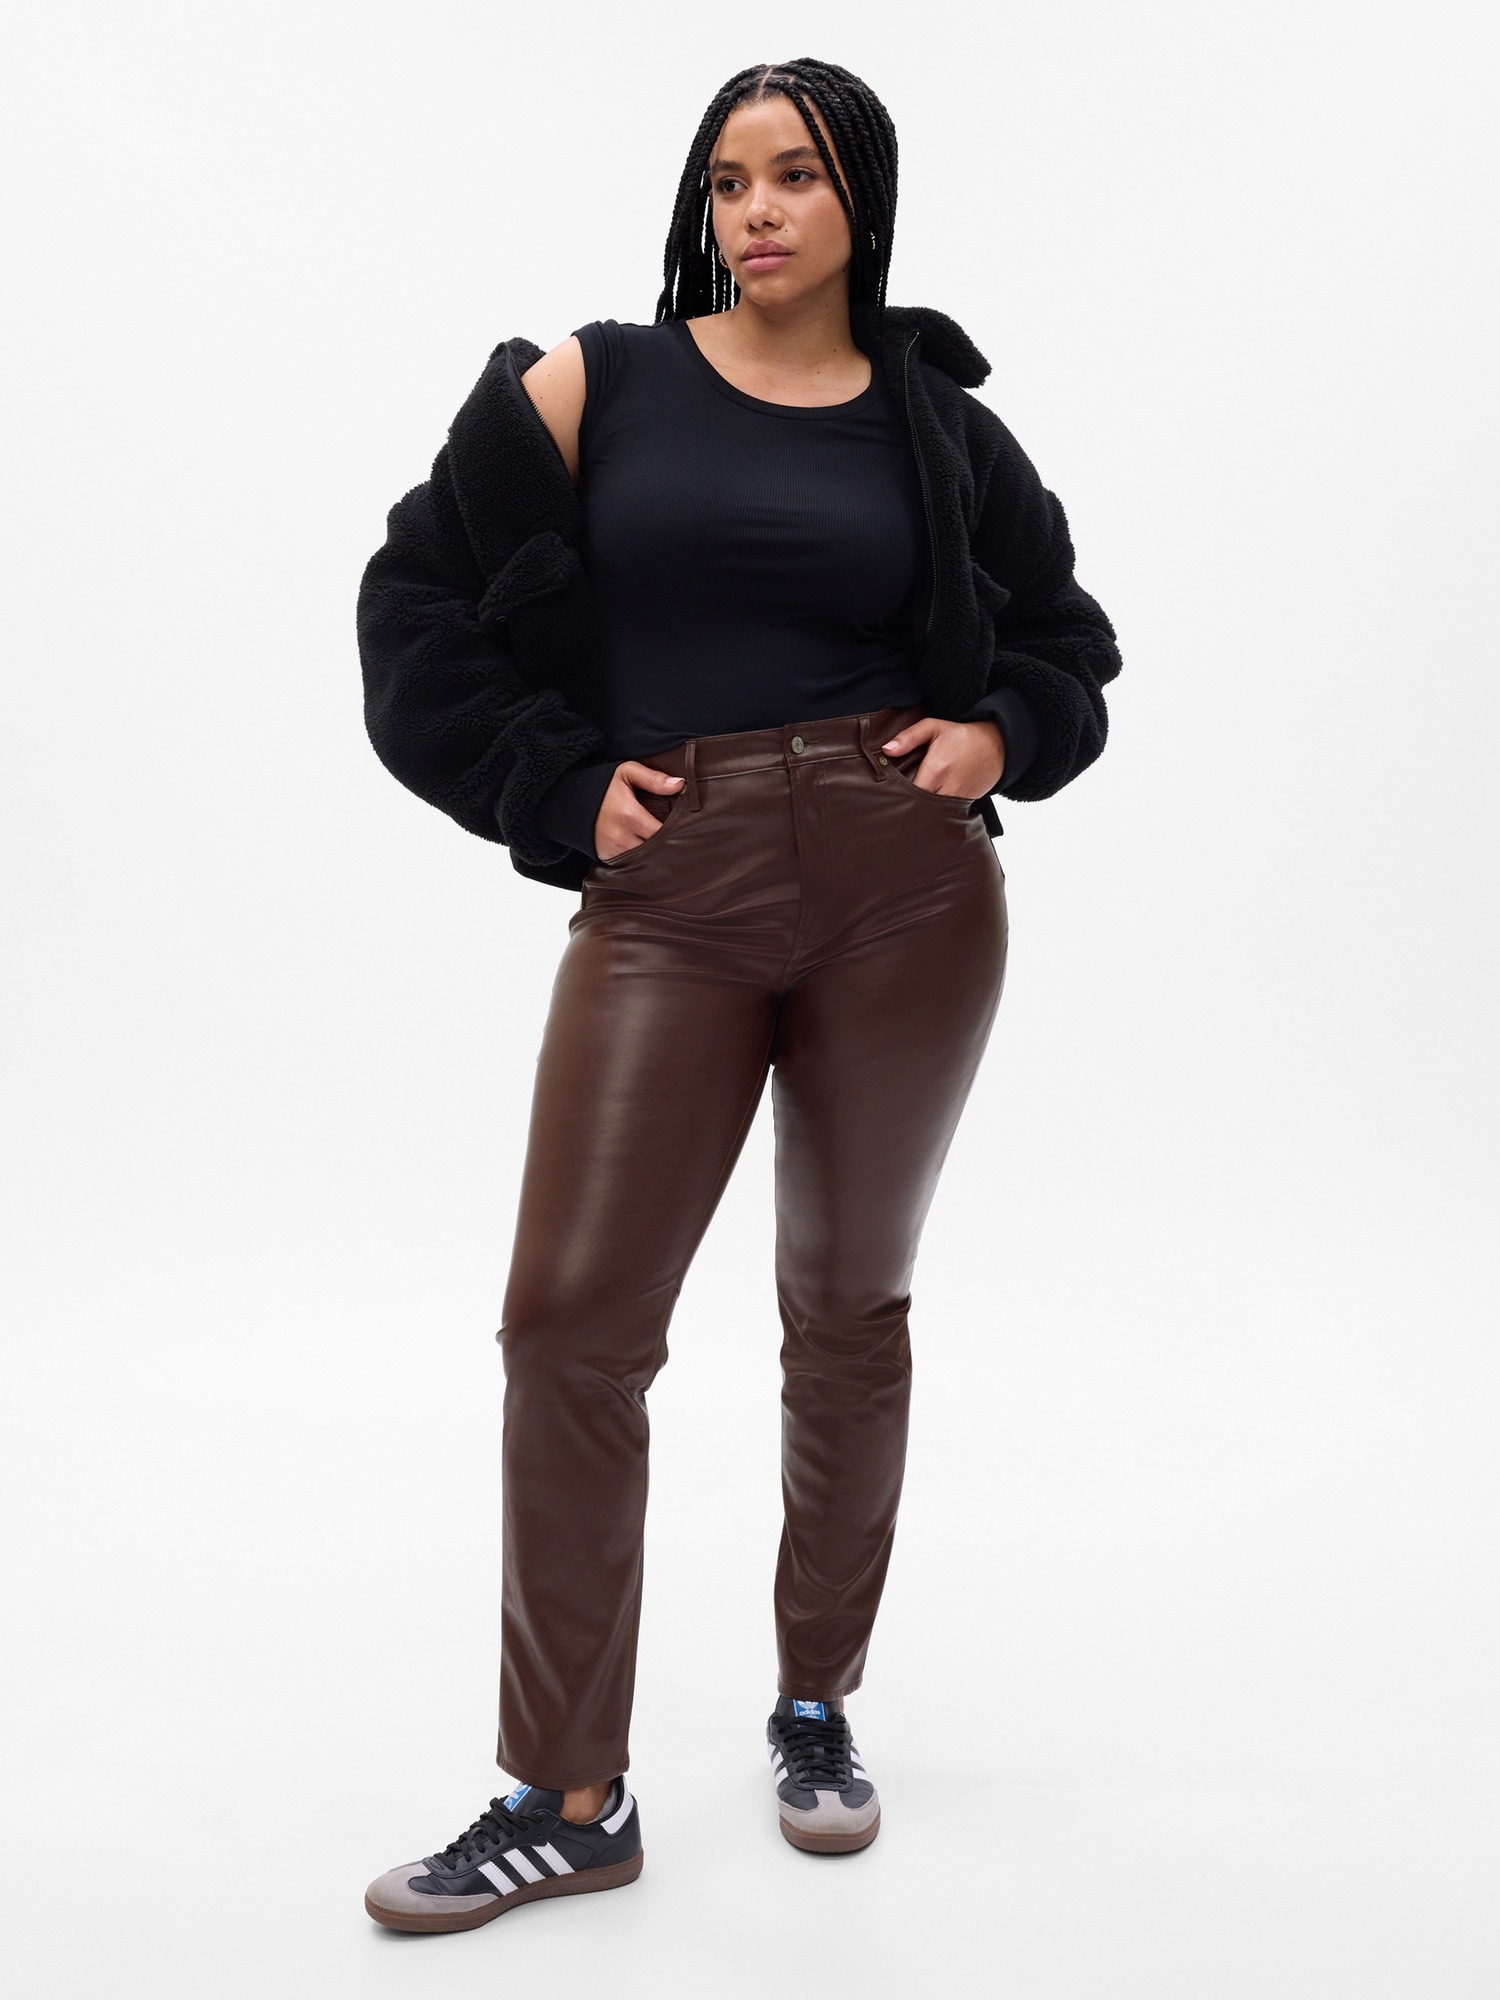 Leather Pants for Women Sexy Skinny Fit Solid Fashion Legging High